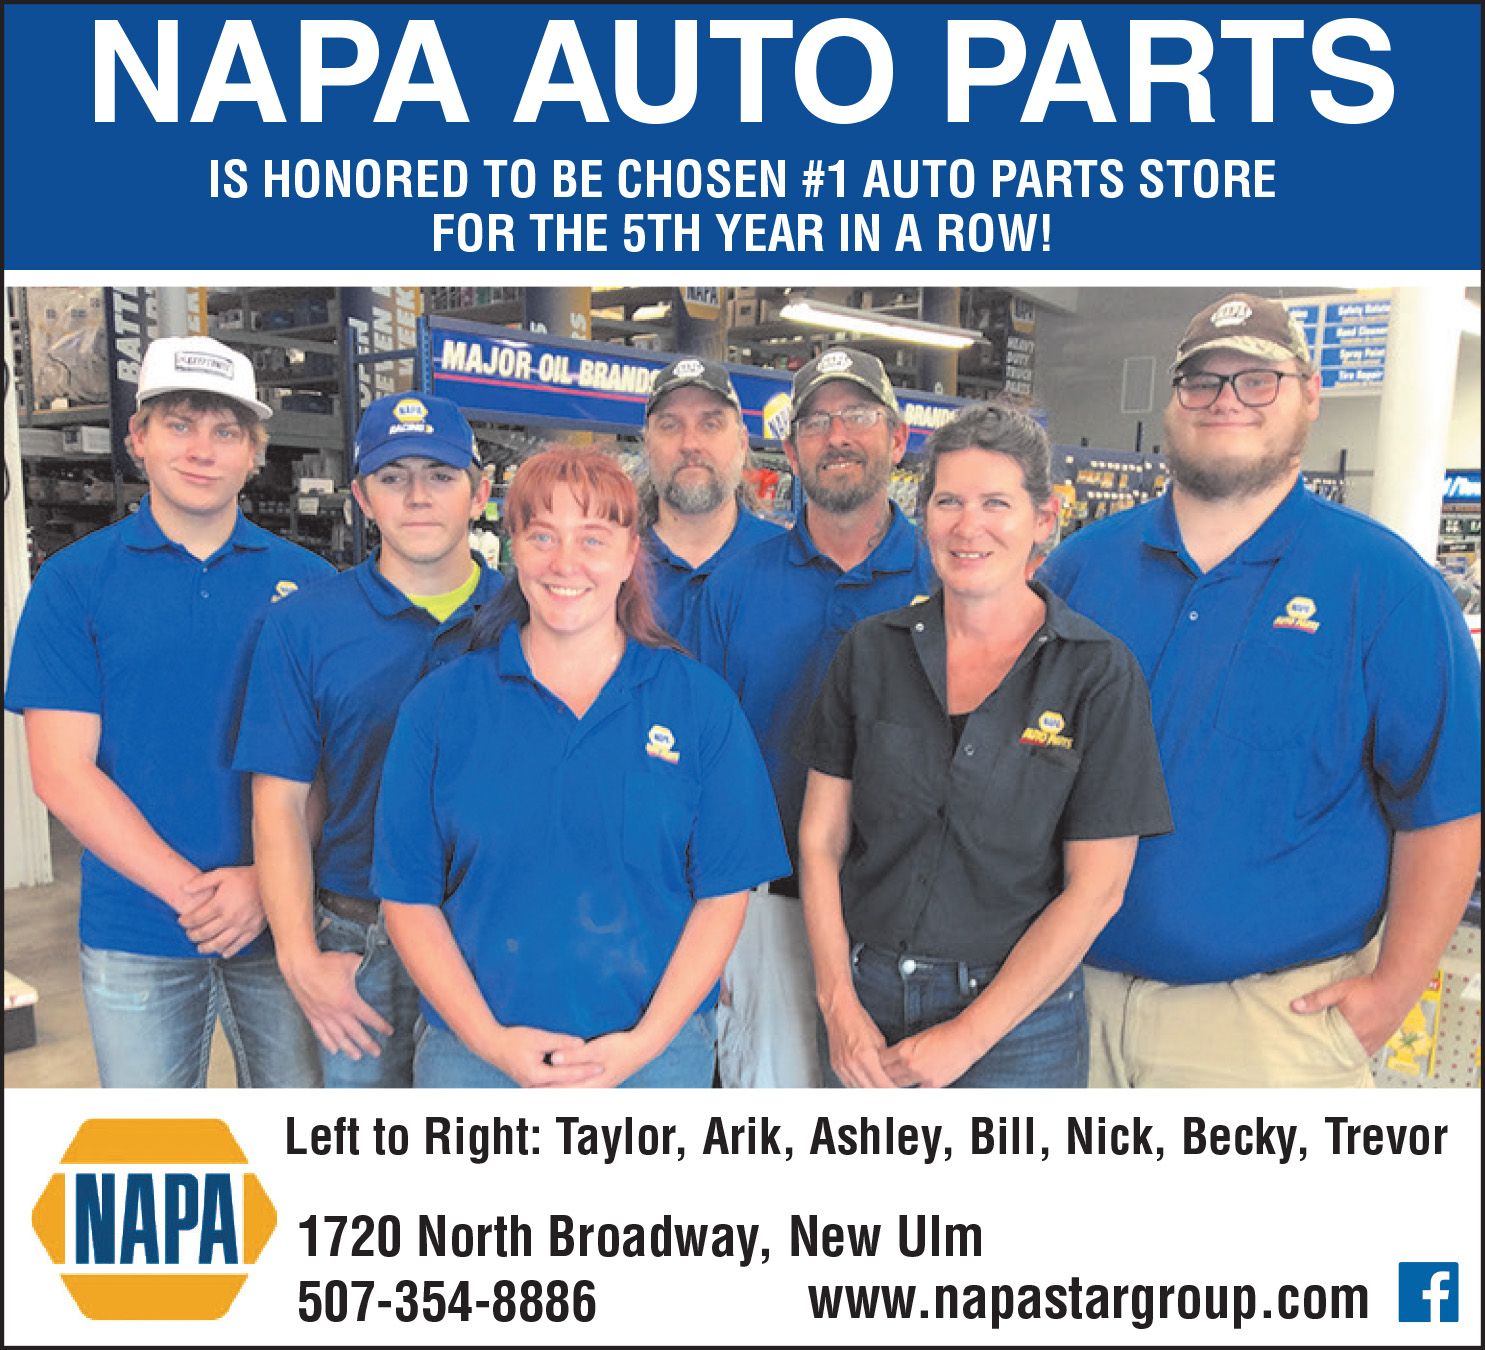 NAPA Auto Parts - #1 auto parts store for the 5th year in a row